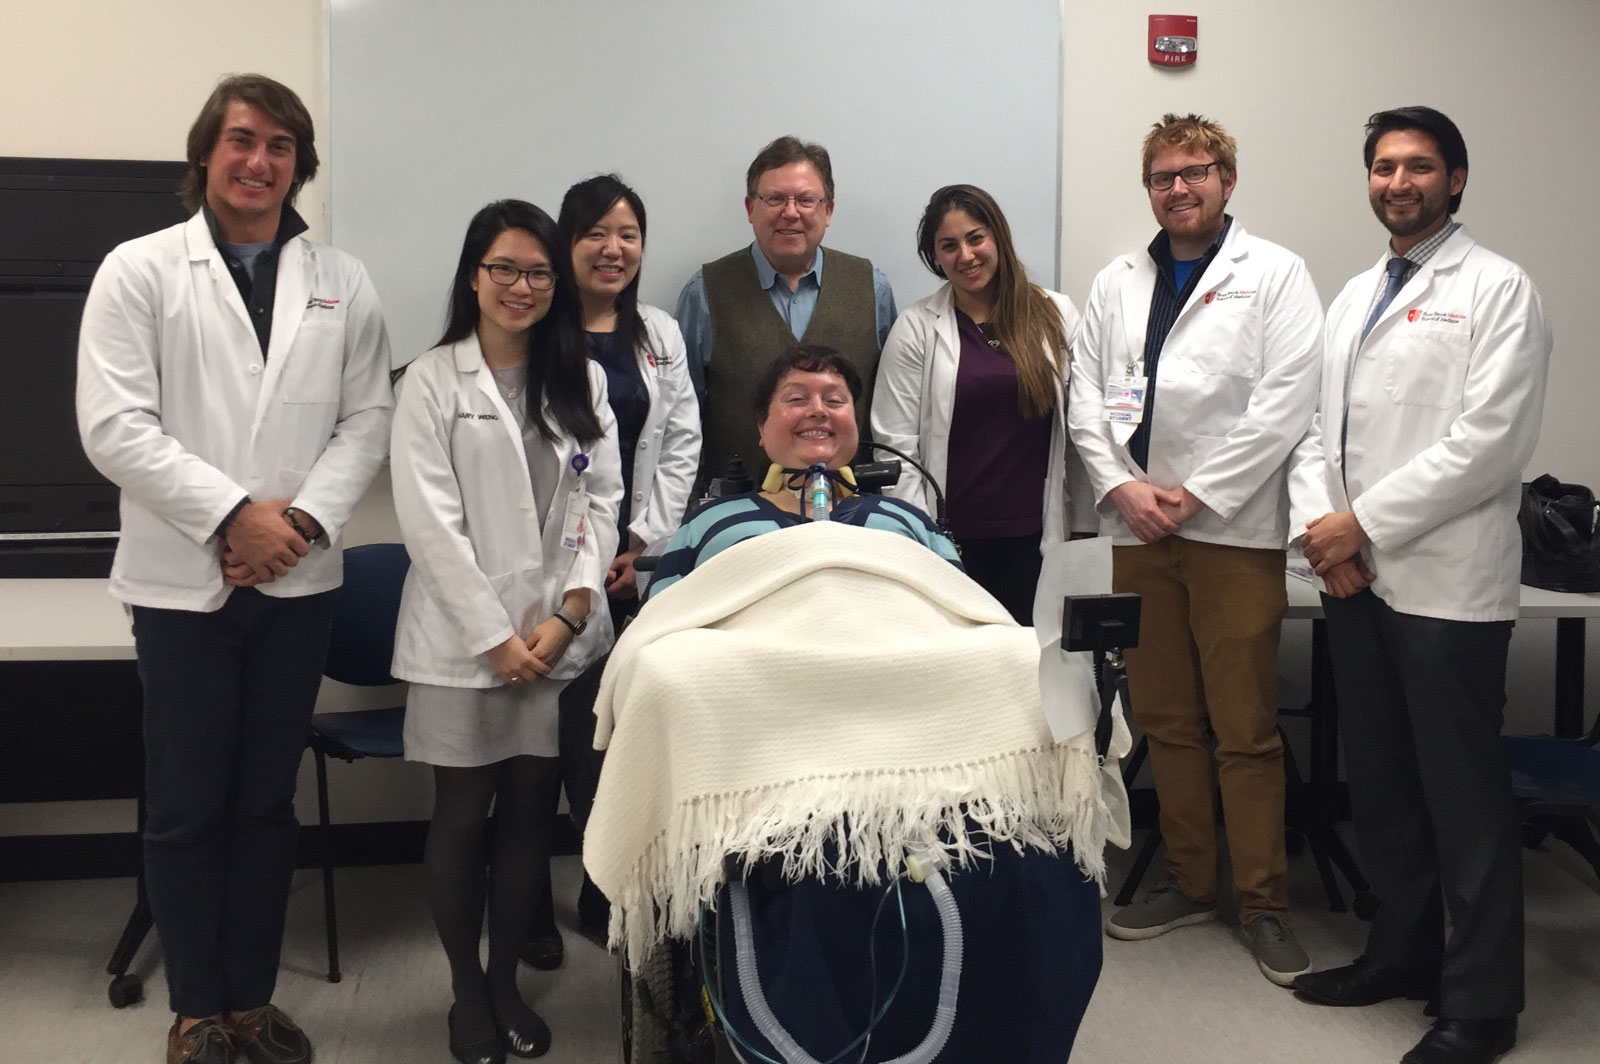 Photo: Brooke Hope with medical students and Stephen Post